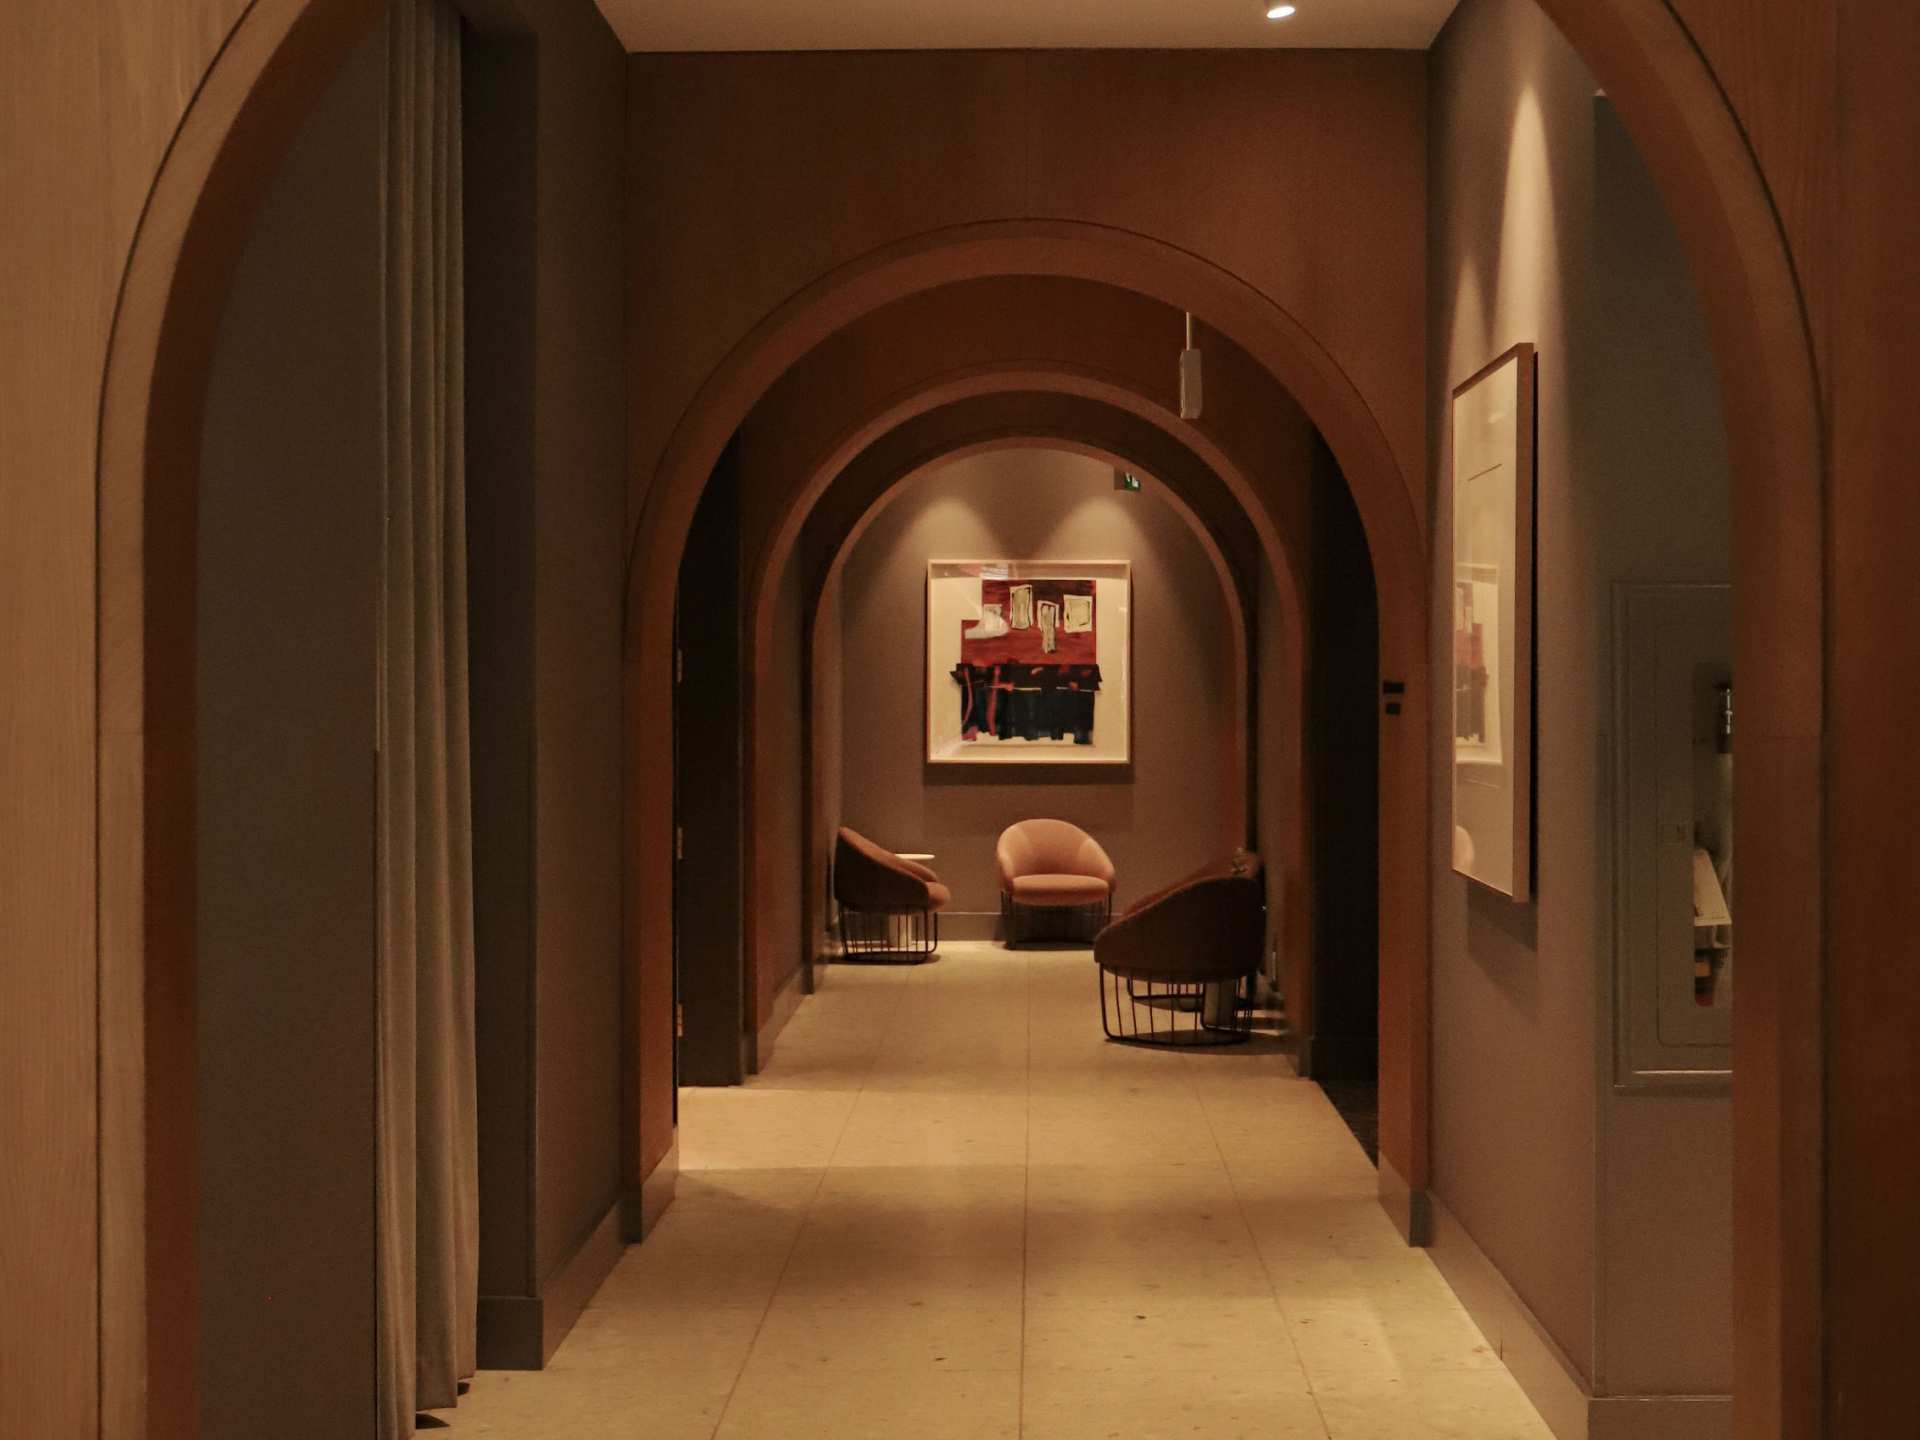 Kimpton Saint George | An arched hallway at the Kimpton Saint George hotel